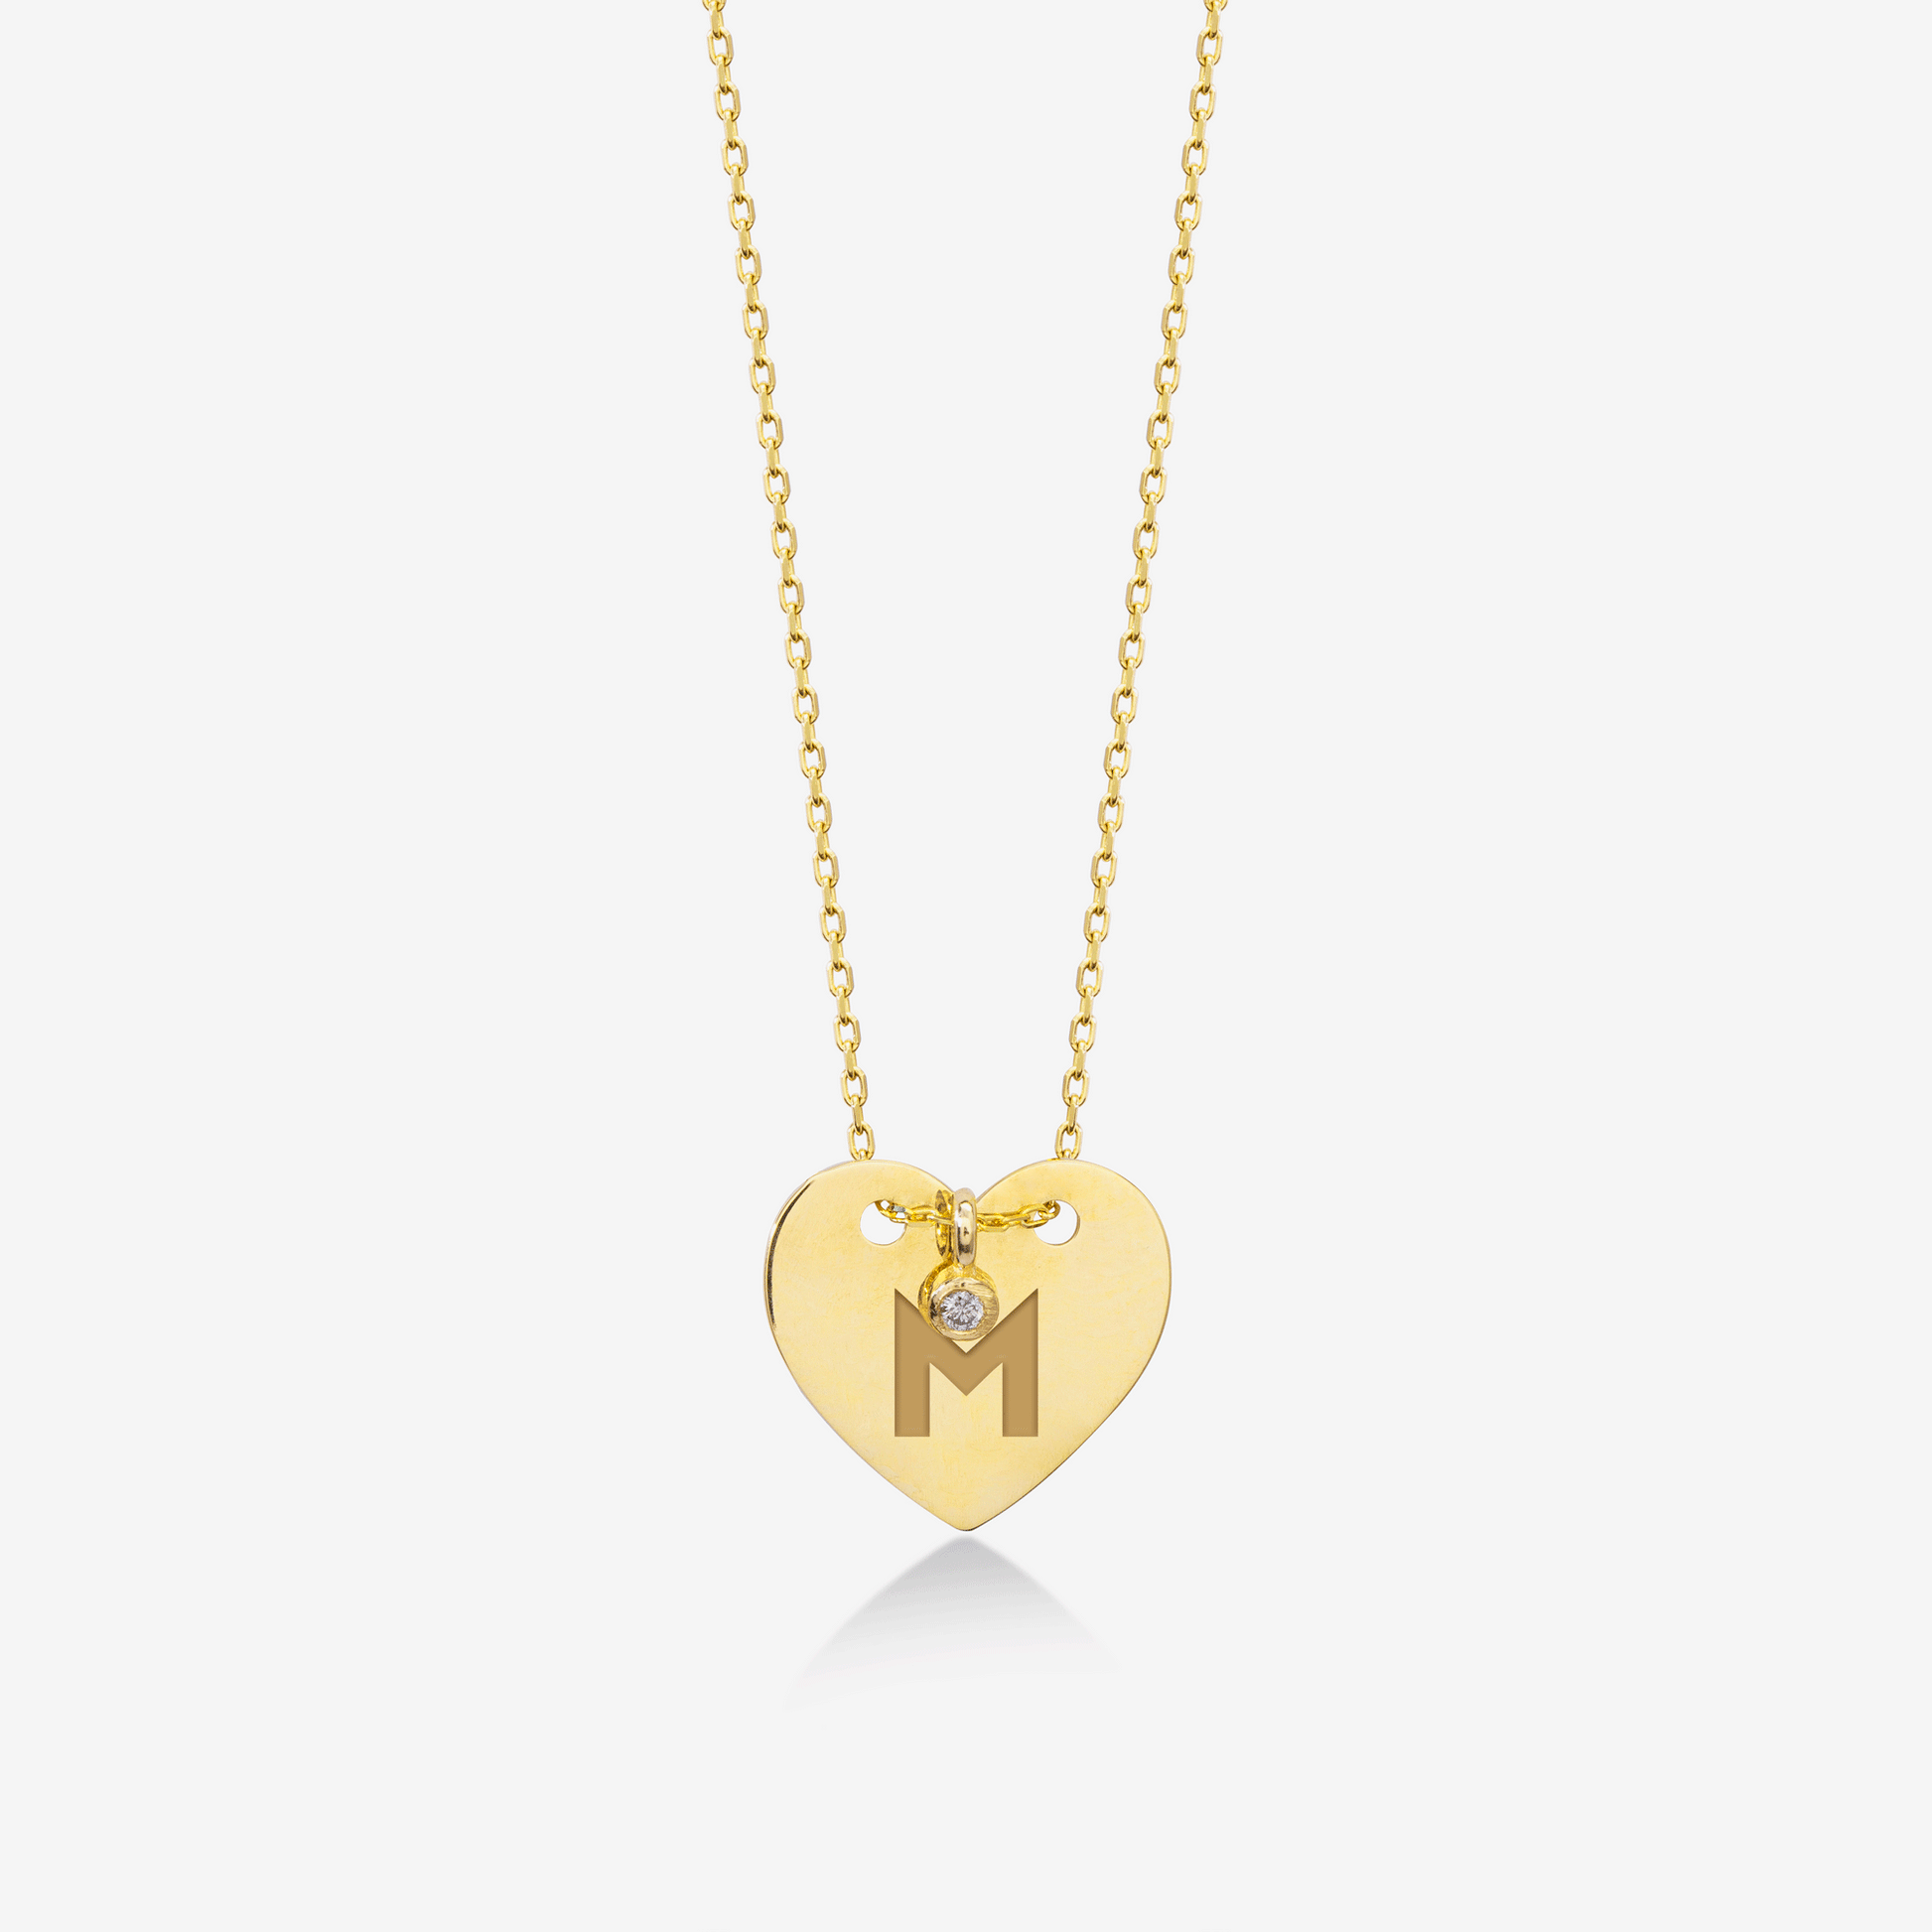 Diamond Heart 14k Solid Gold Necklace for Women